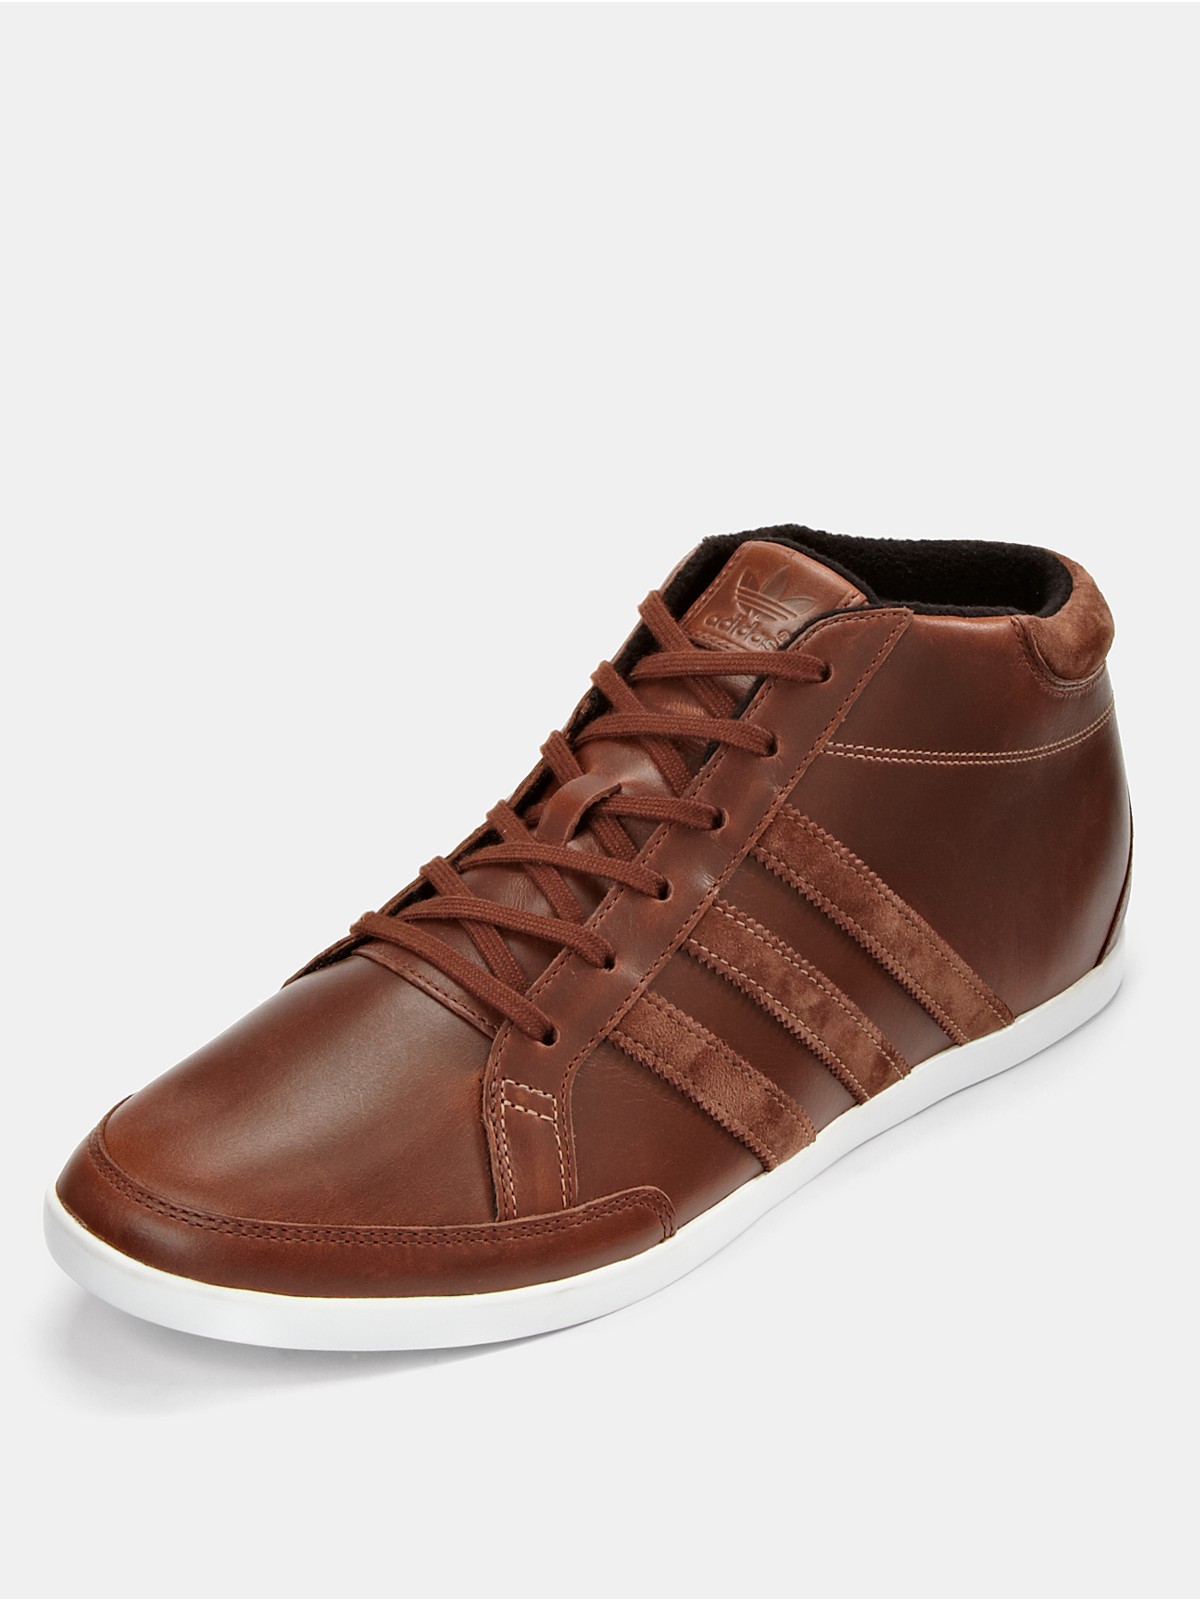 Adidas Adidas Originals Mens Up 58 Sports Boots in Brown for Men (brown